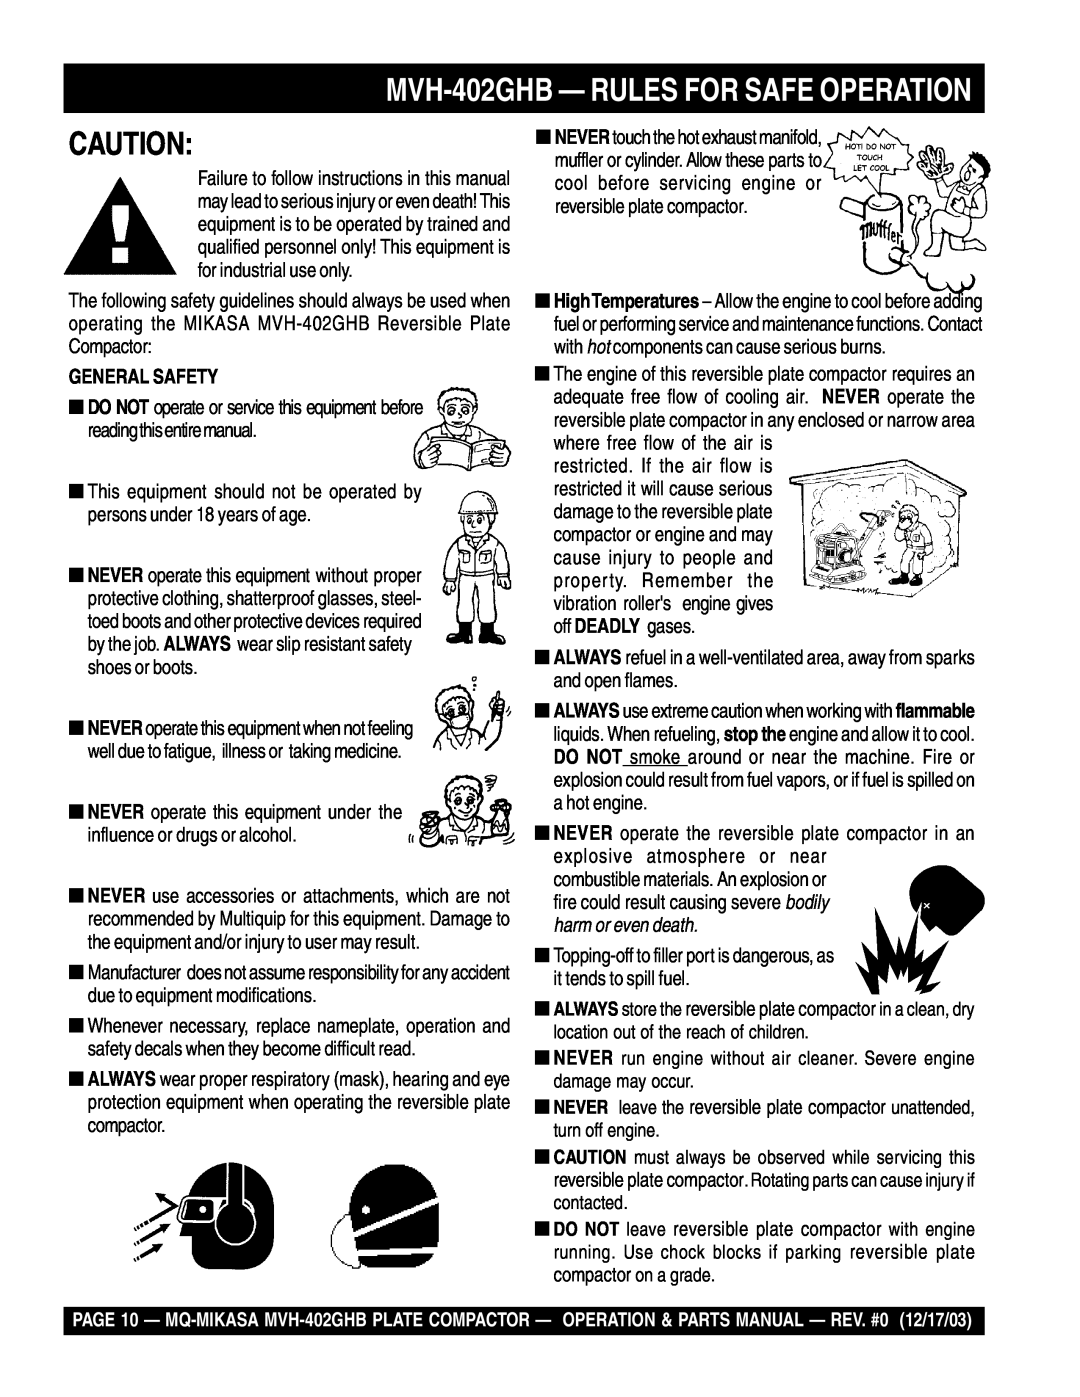 Multiquip manual MVH-402GHB- RULES FOR SAFE OPERATION, General Safety 